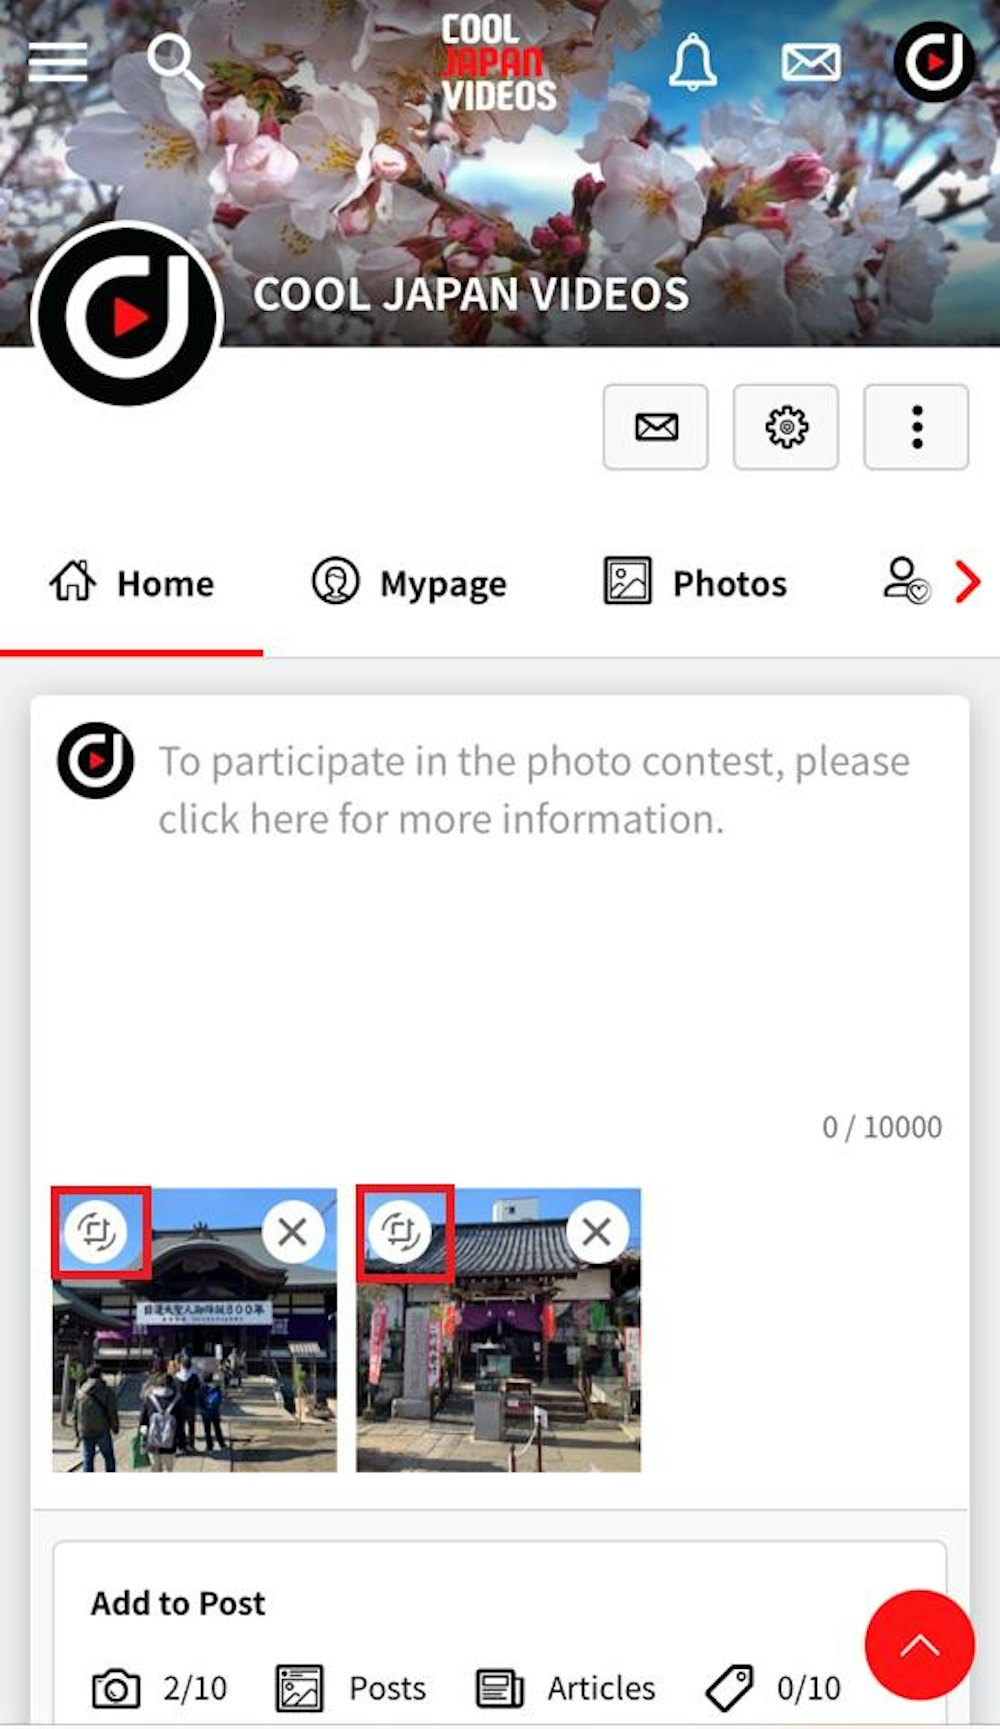 New Feature: Rotating and Reordering Images on Posts